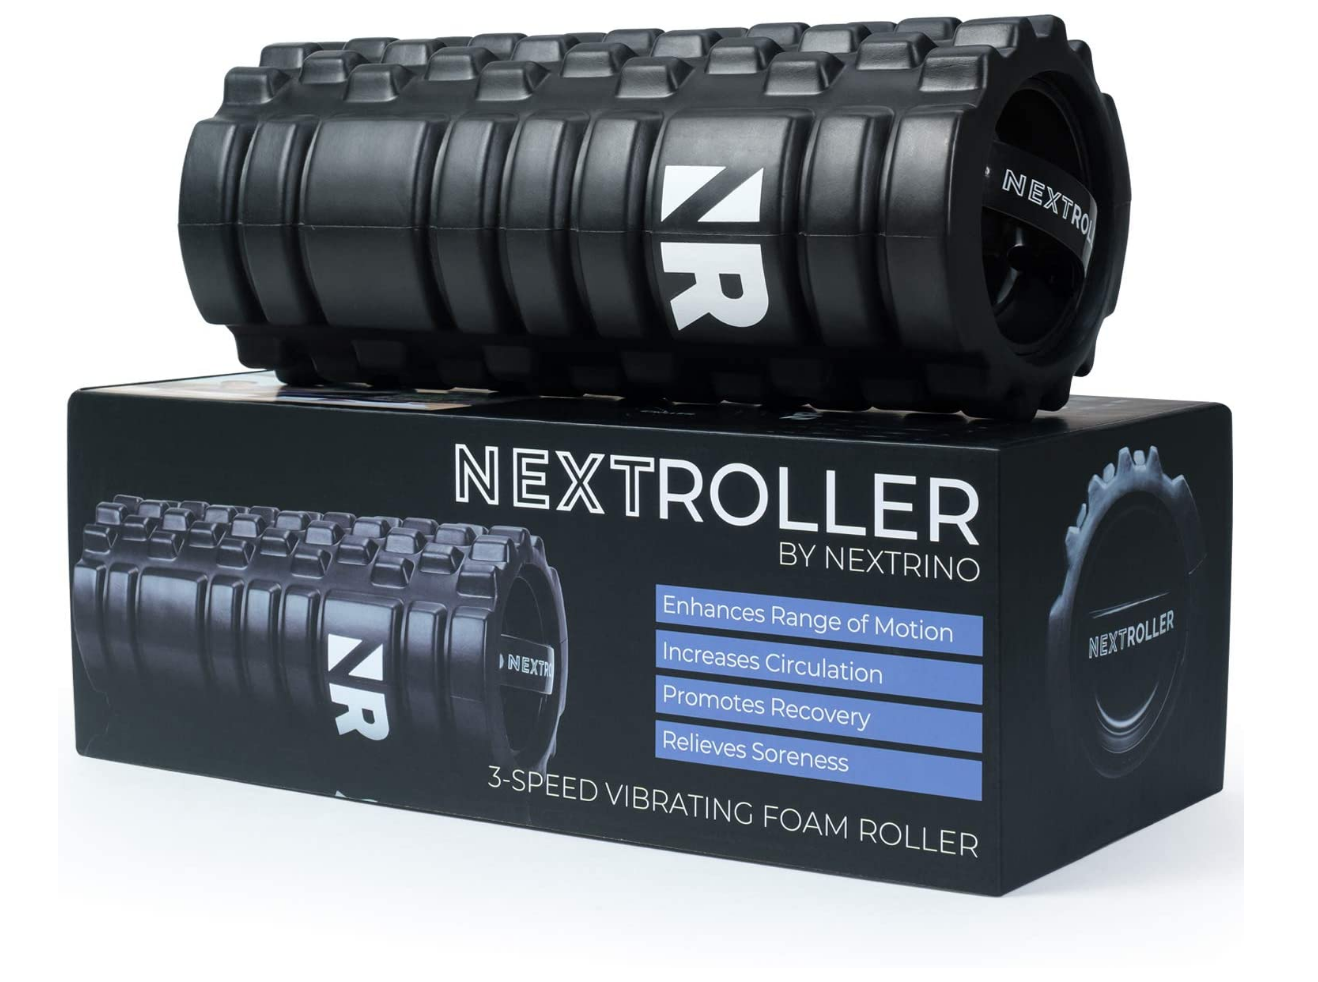 Nextrino Vibrating Foam Roller for Physical Therapy & Exercise Review